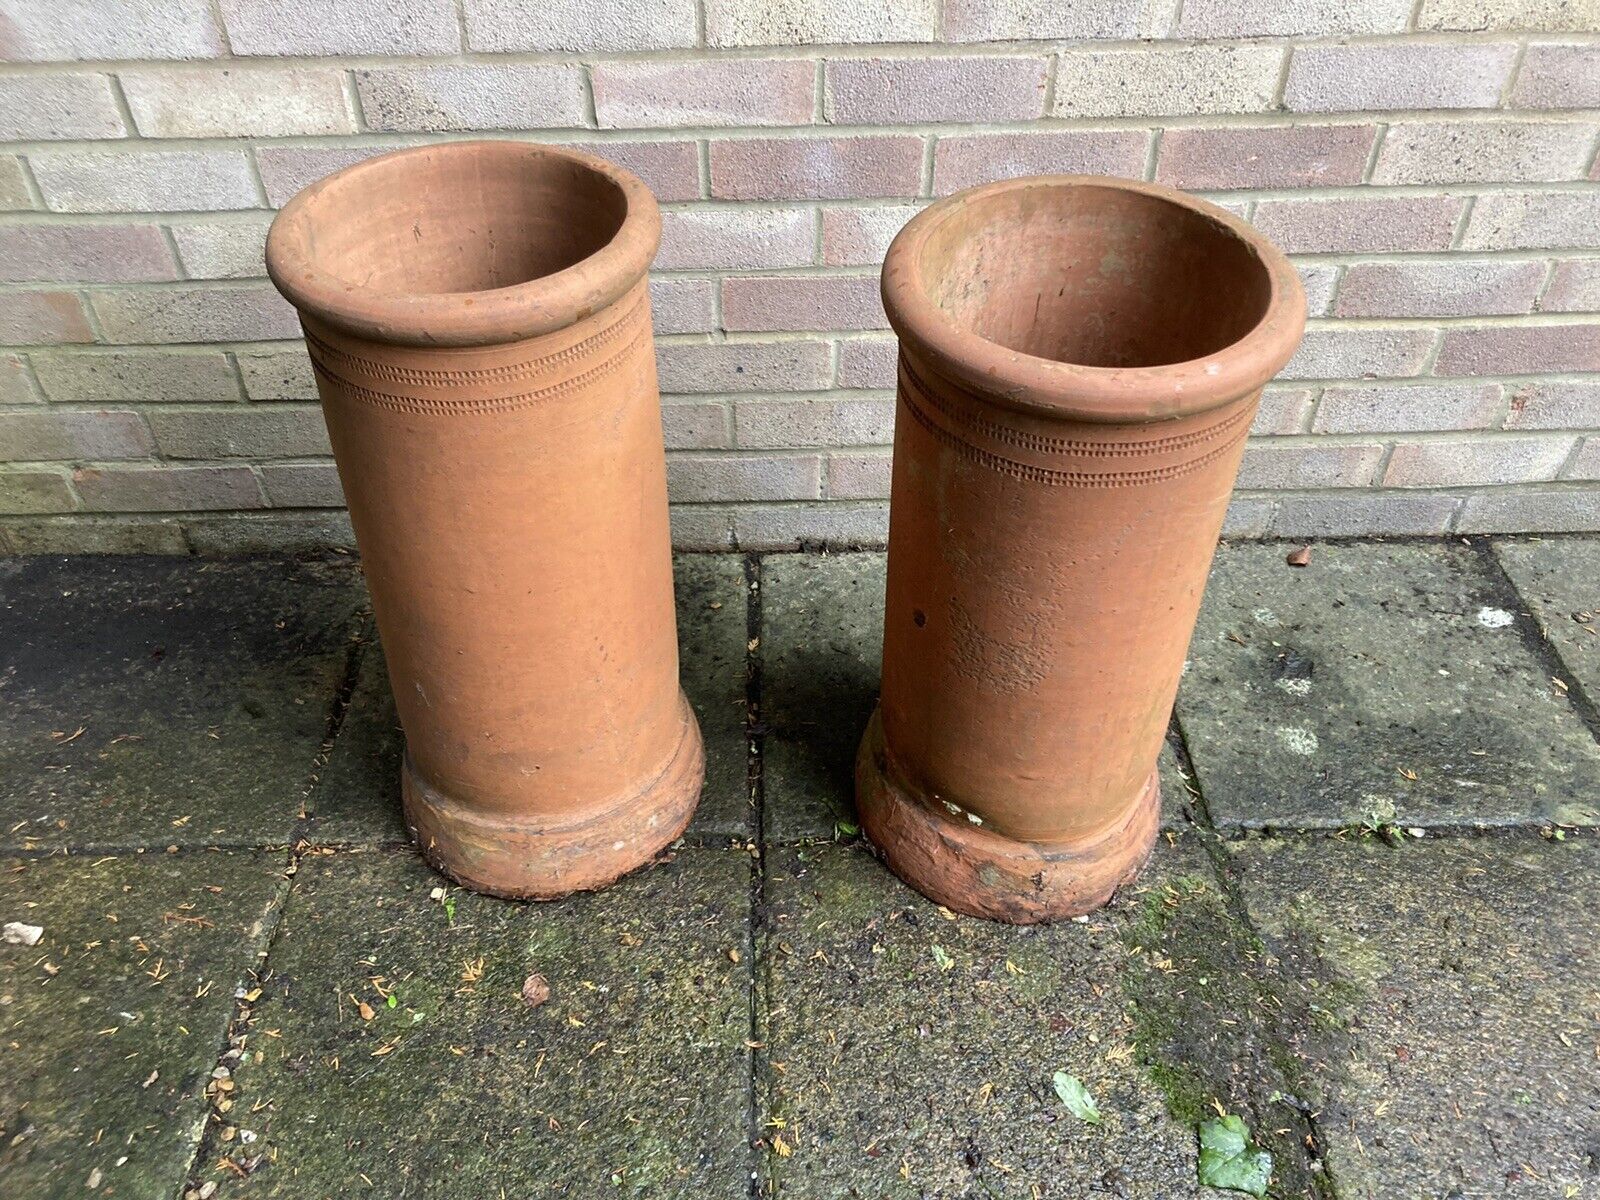 Antique Valuations: Reclaimed Pair Of Terracotta Chimmney Pots In Nice Condition.